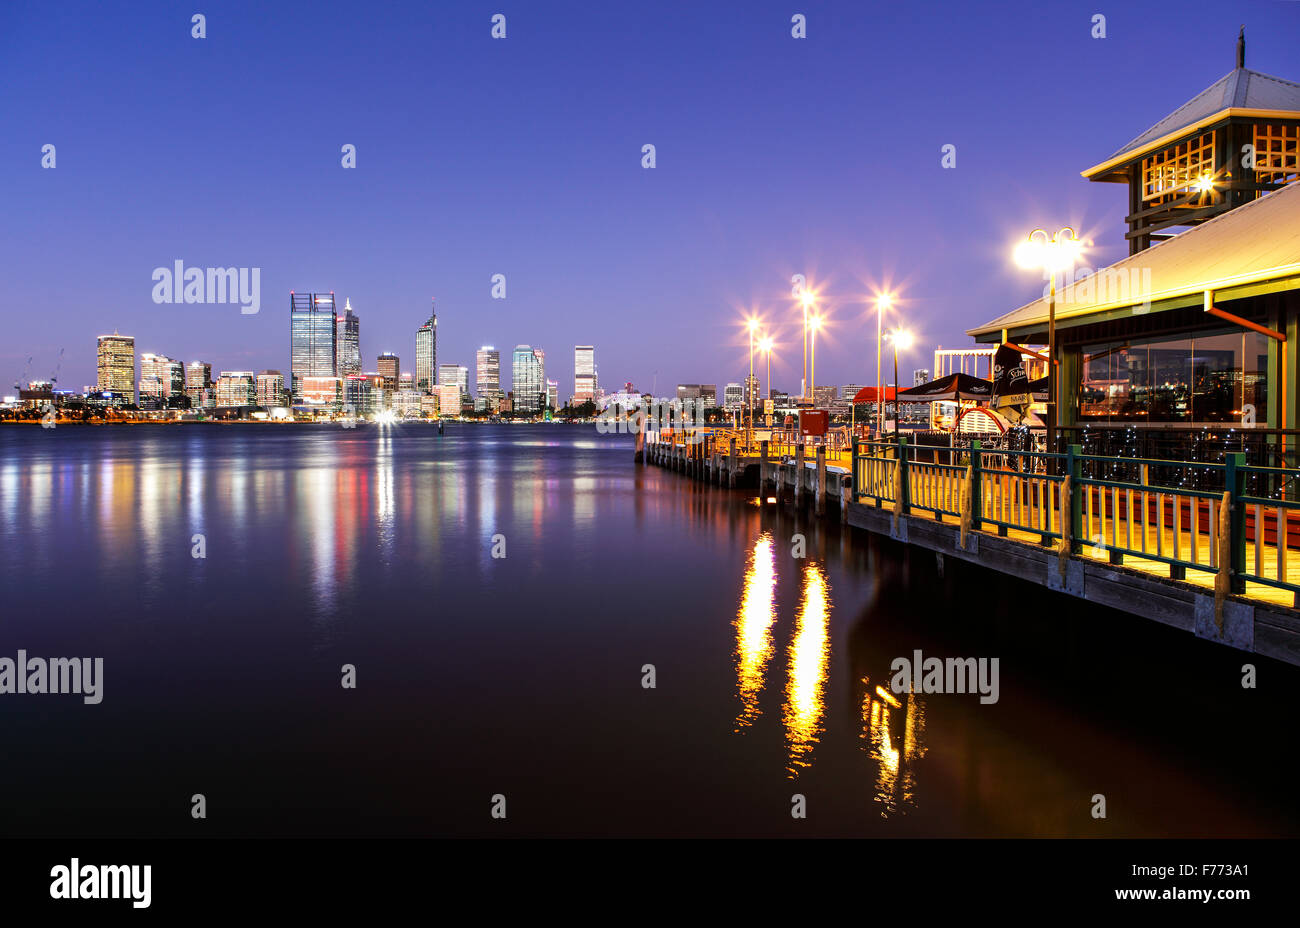 The city of Perth from Mends St Jetty, South Perth, Australia. Stock Photo